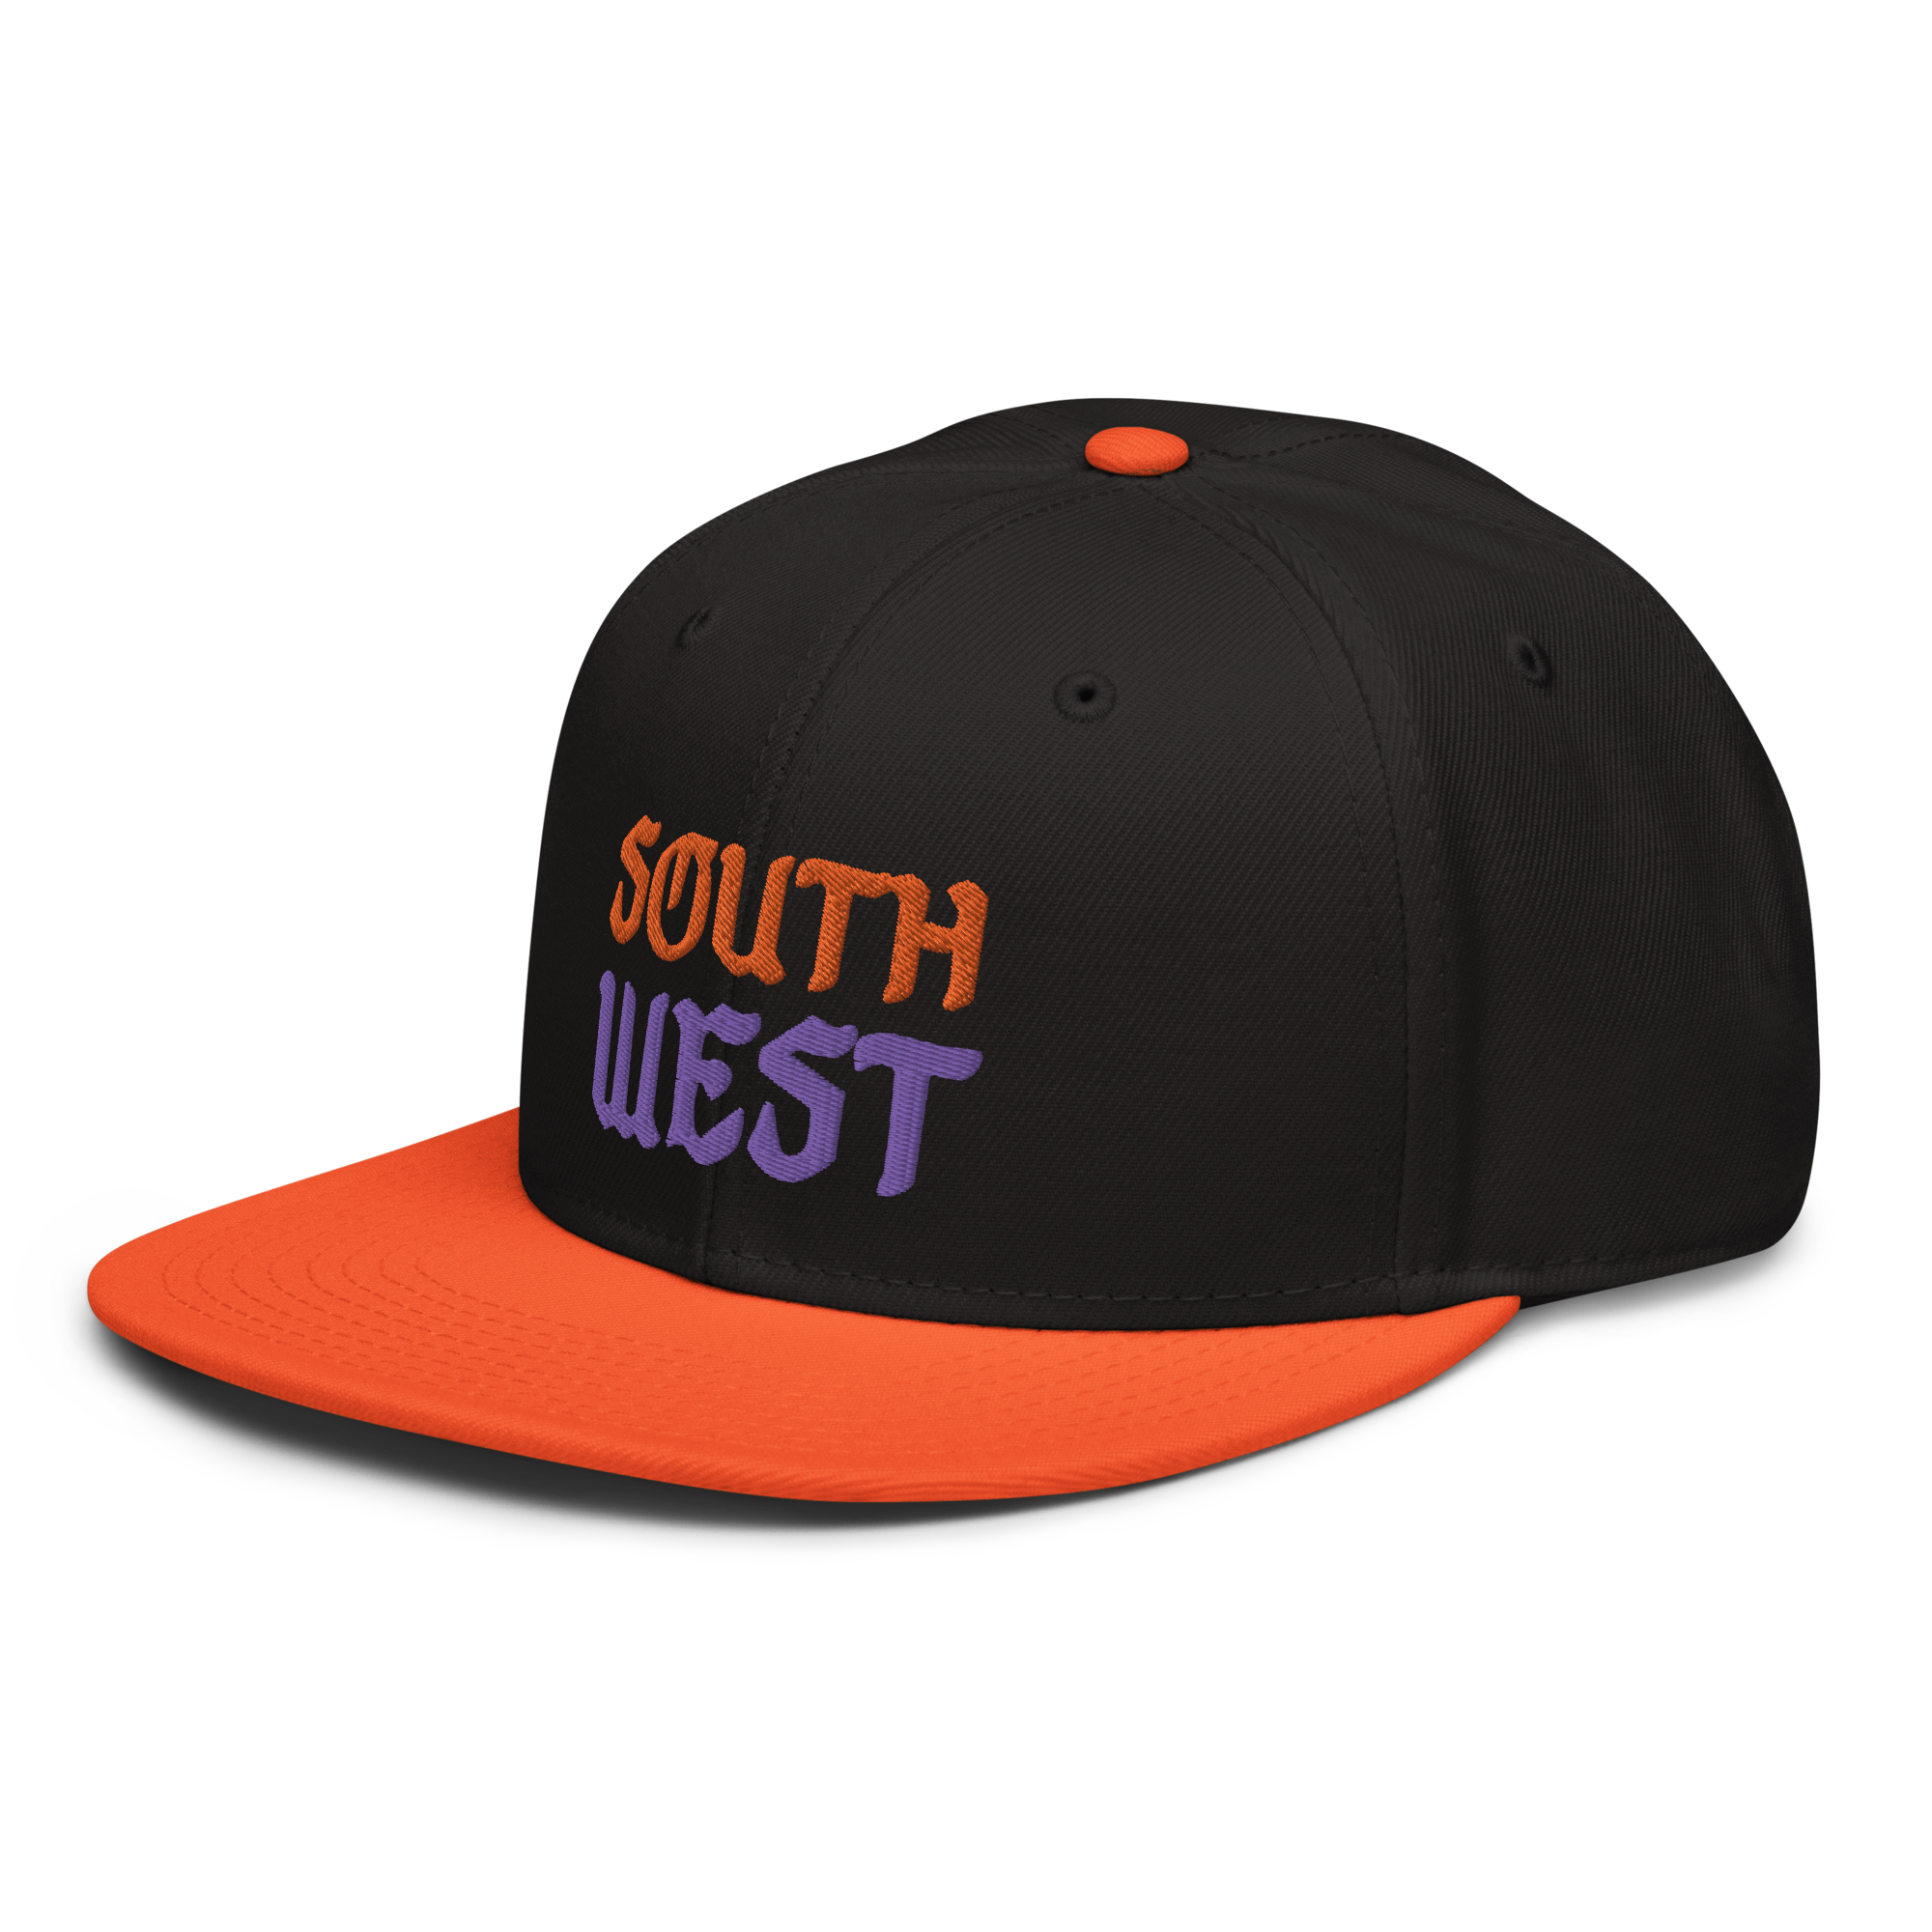 SouthWest Snapback Hat – Organ Mountain Outfitters